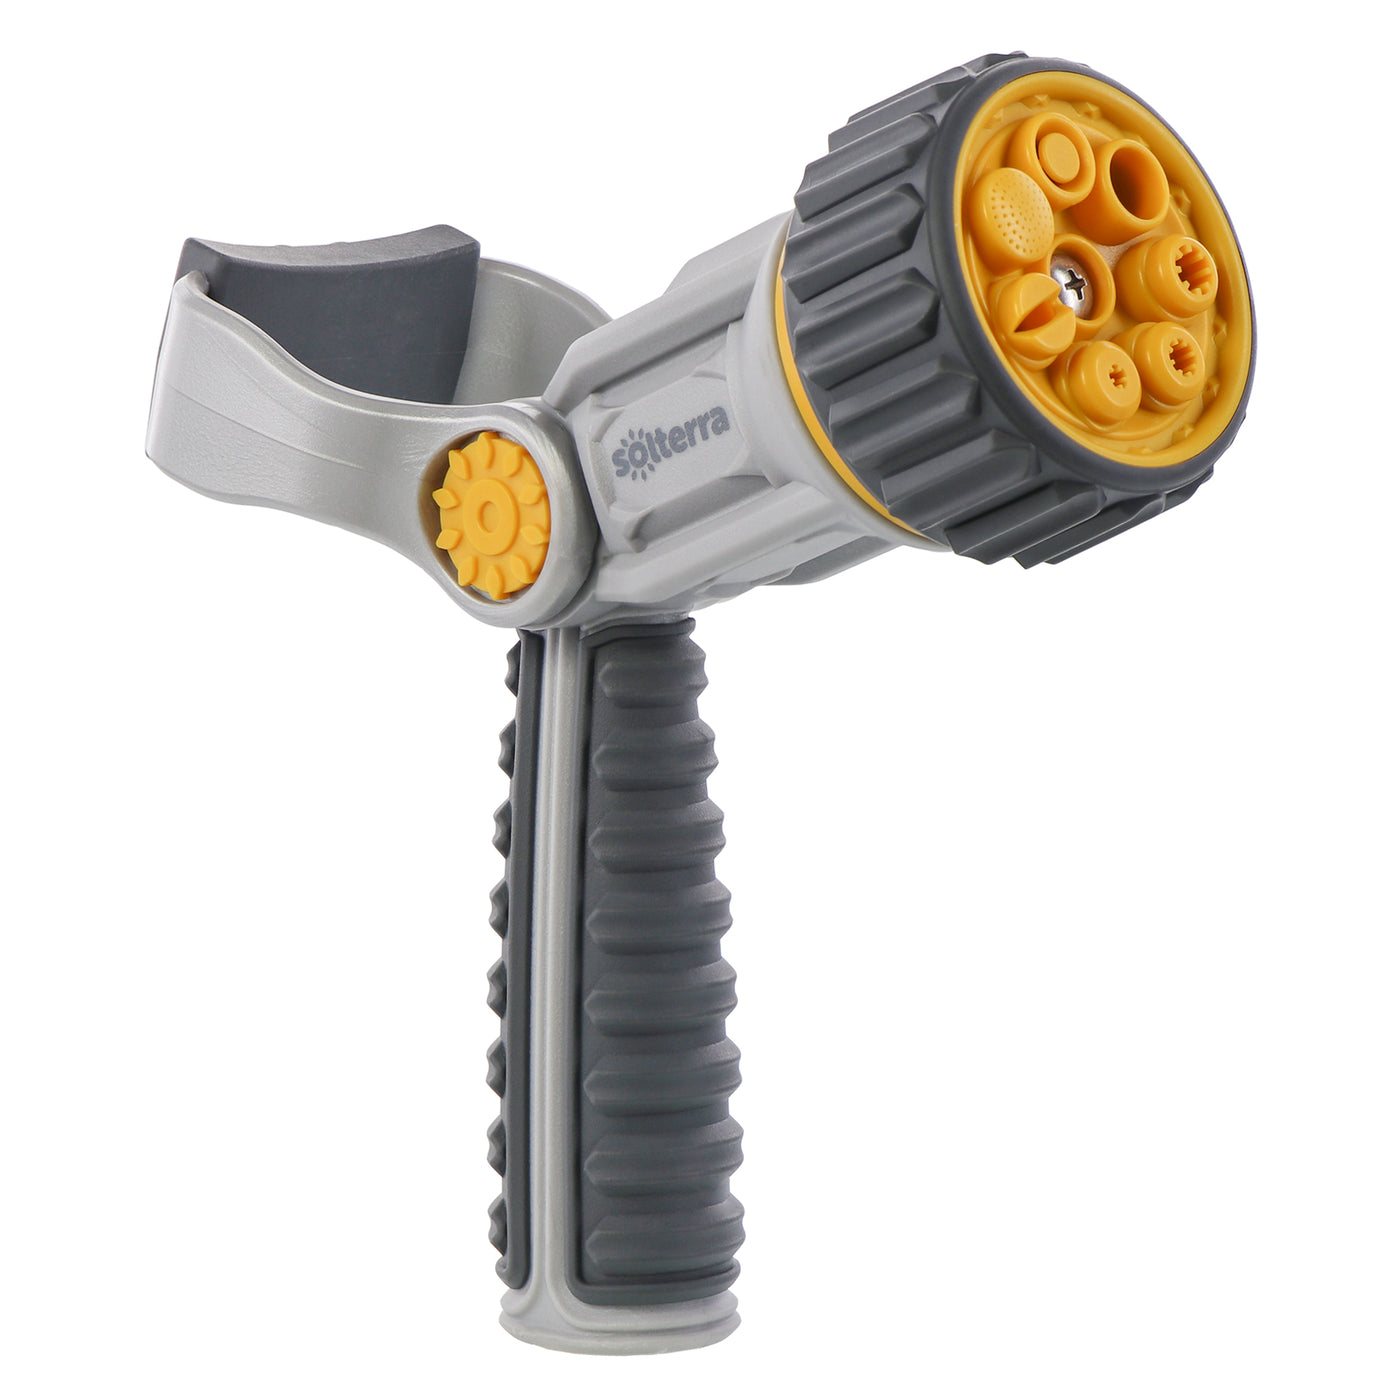 Gray, charcoal and yellow adjustable garden hose nozzle with rear trigger, fireman Lever. 